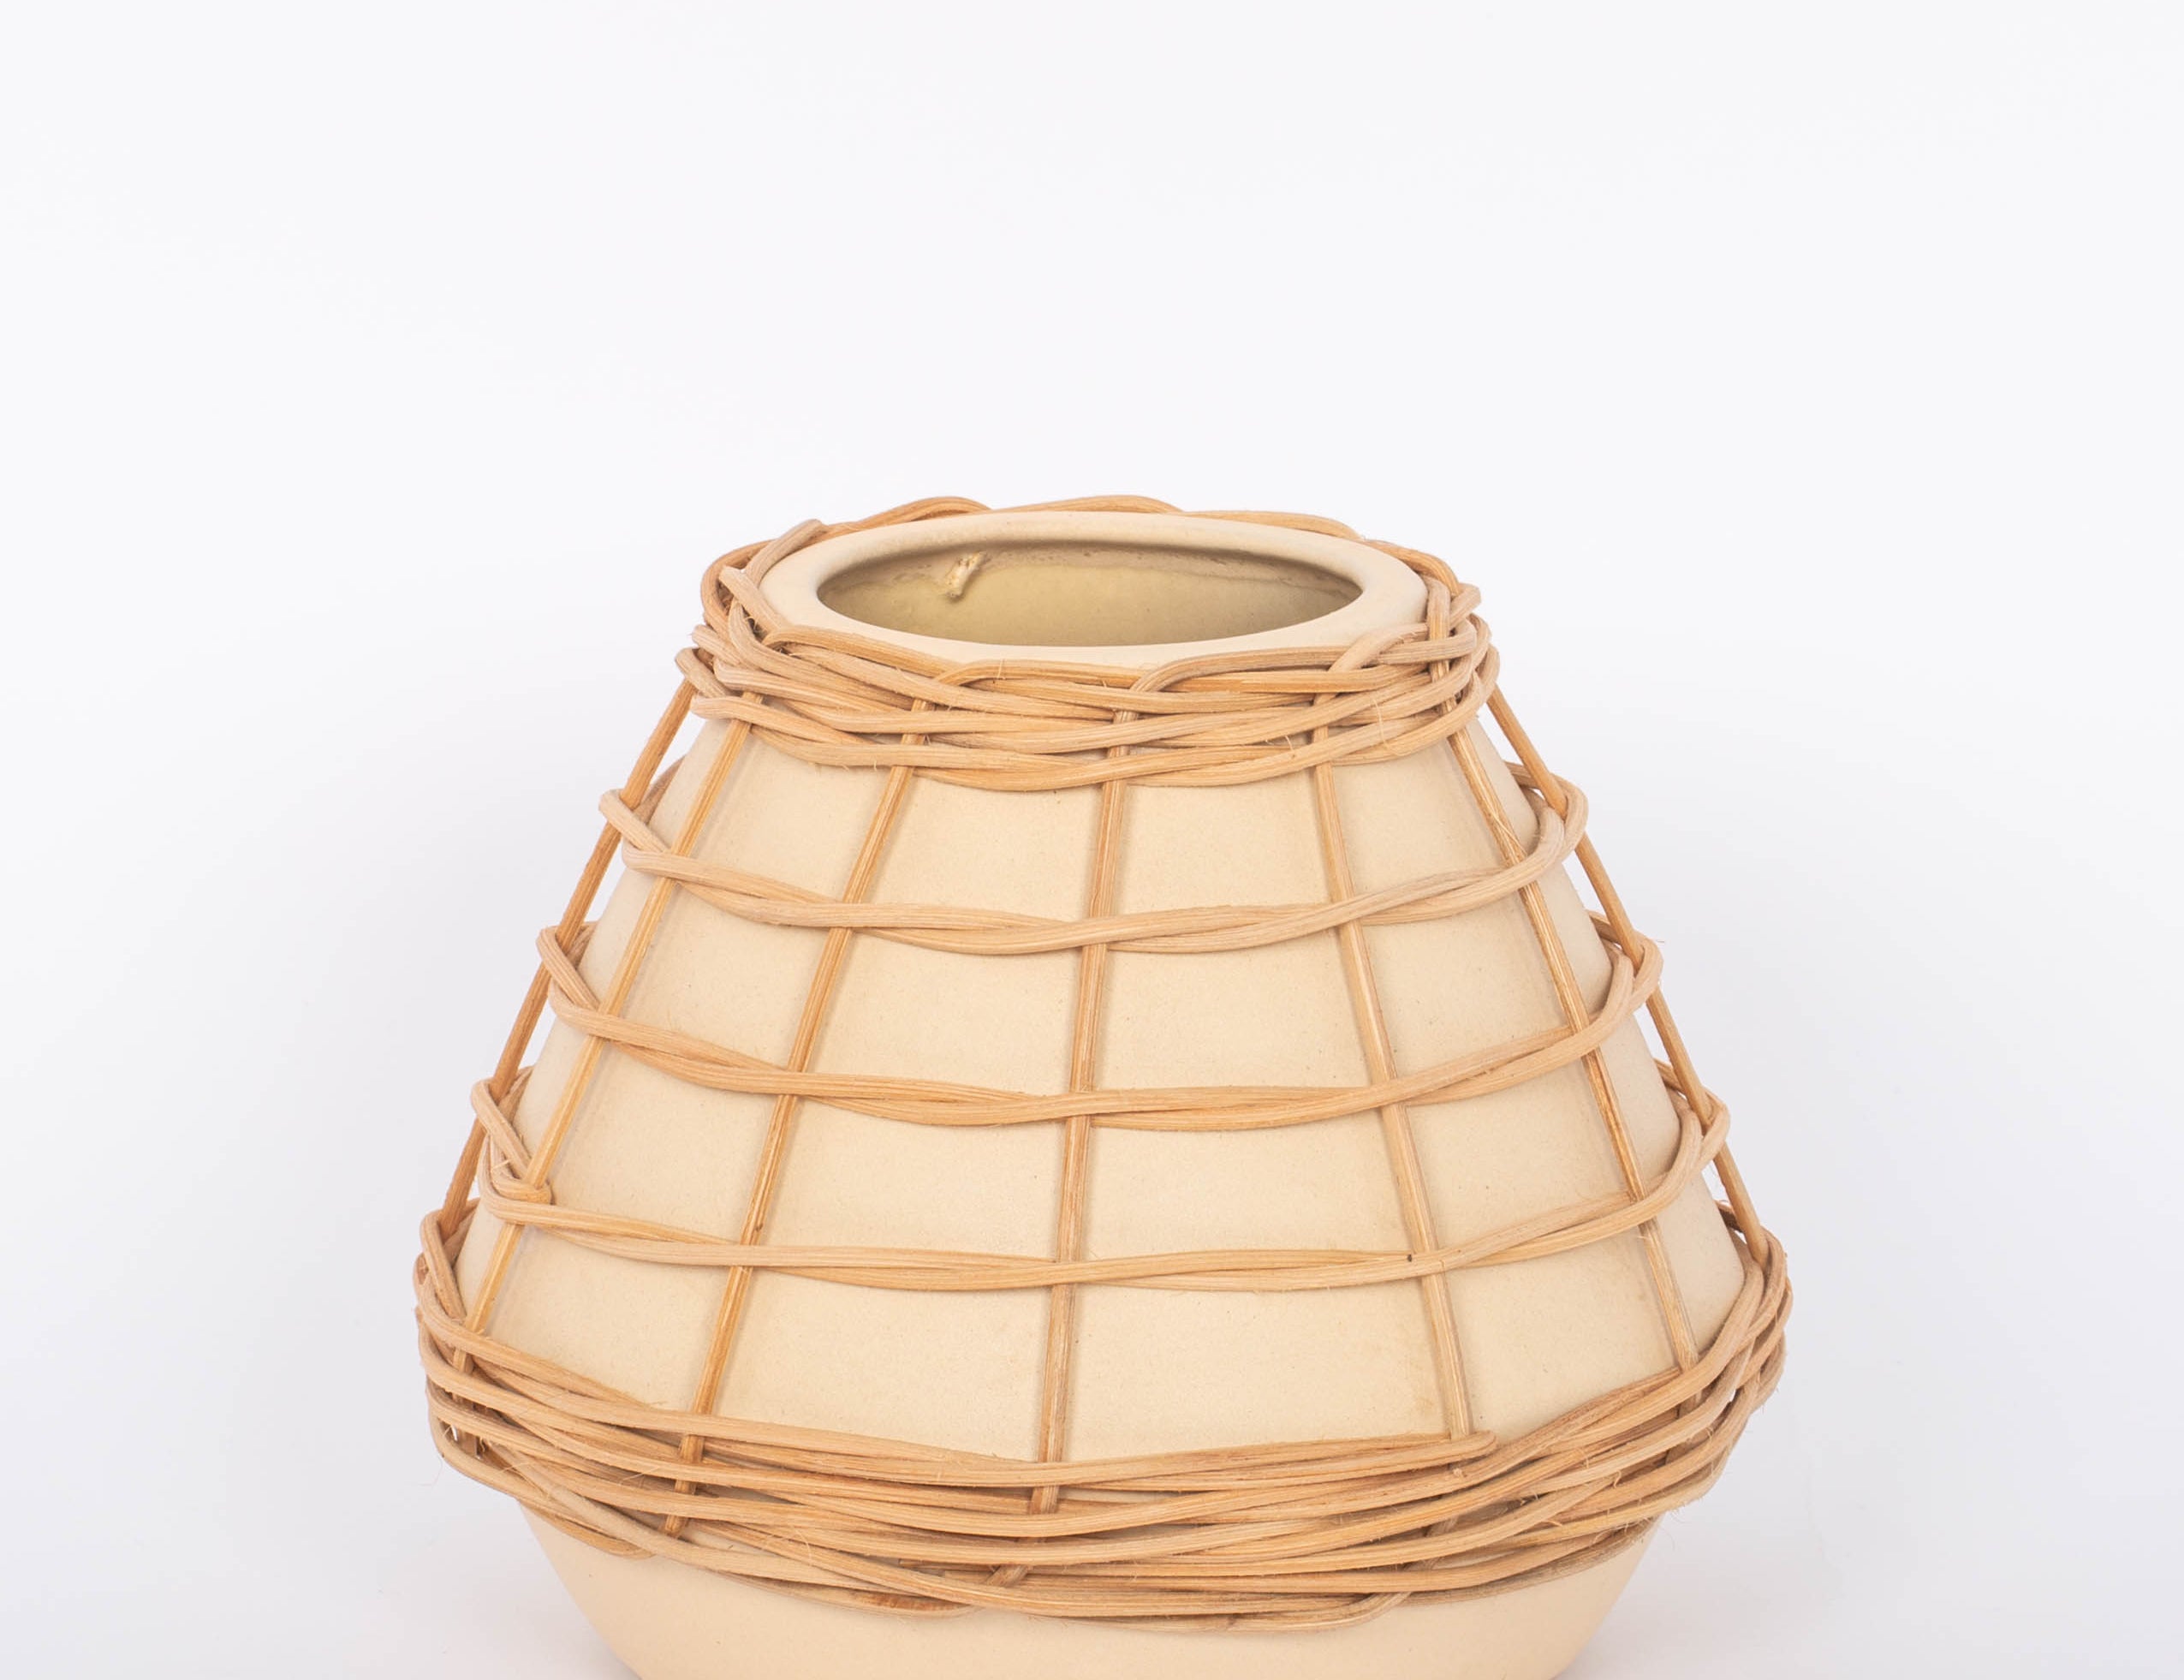 Lissome Tan Vase speckled neutral toned earthenware and woven rattan accents. White background.